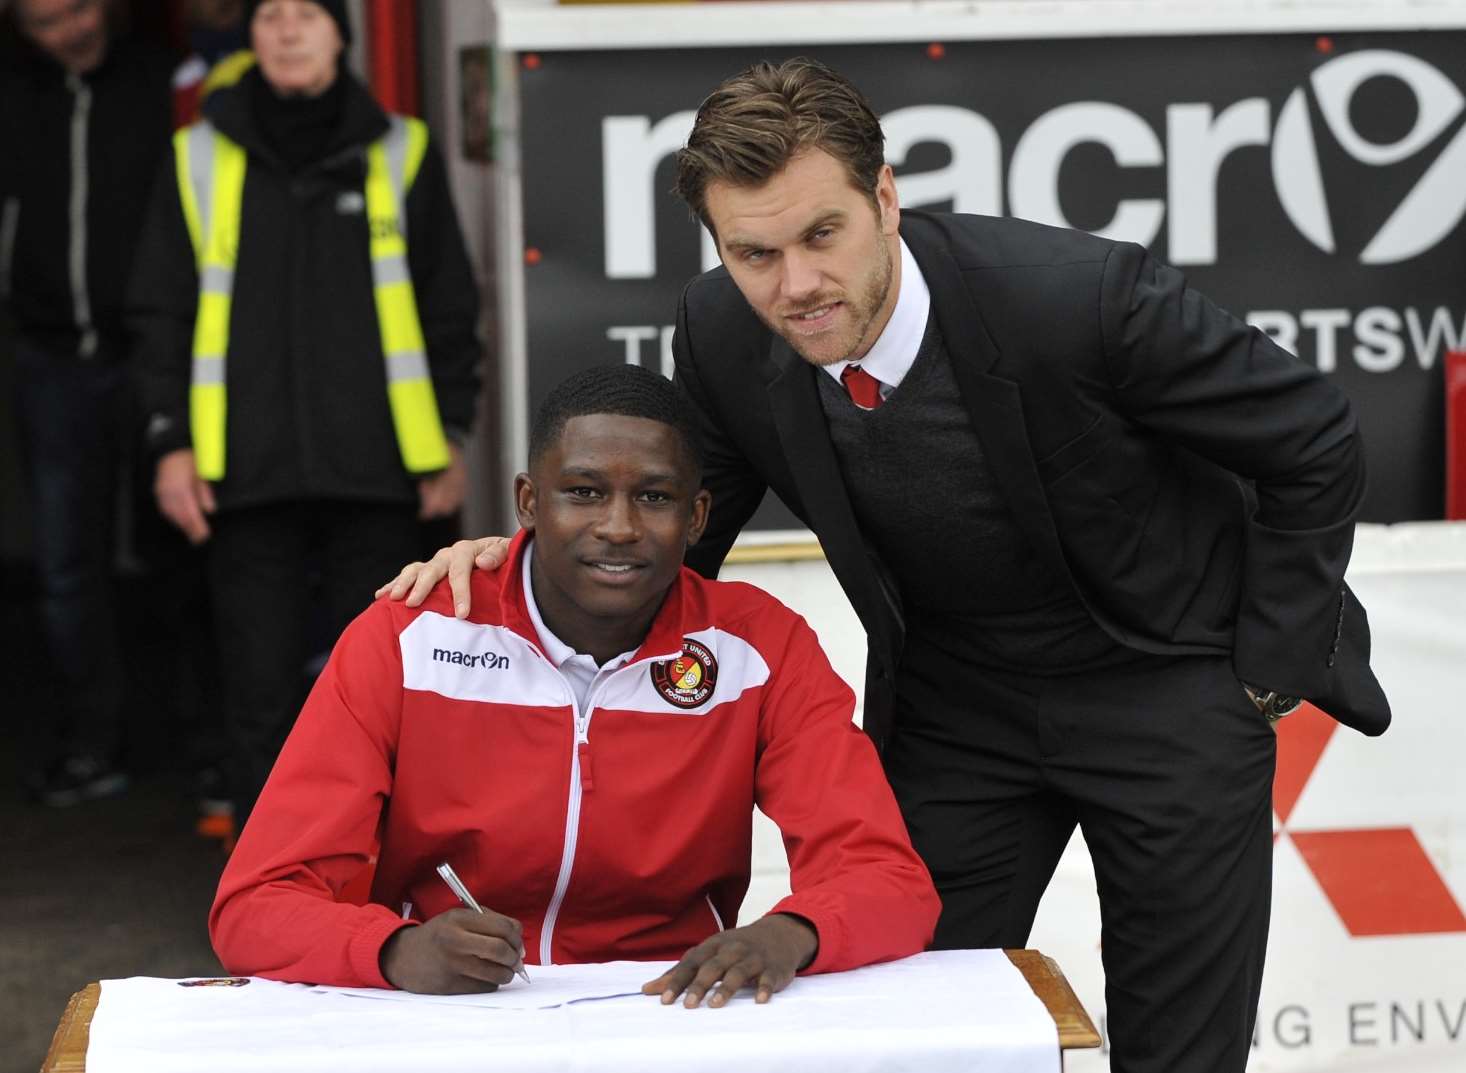 Shilow Tracey signed a contract at Ebbsfleet towards the end of the 2014/15 season